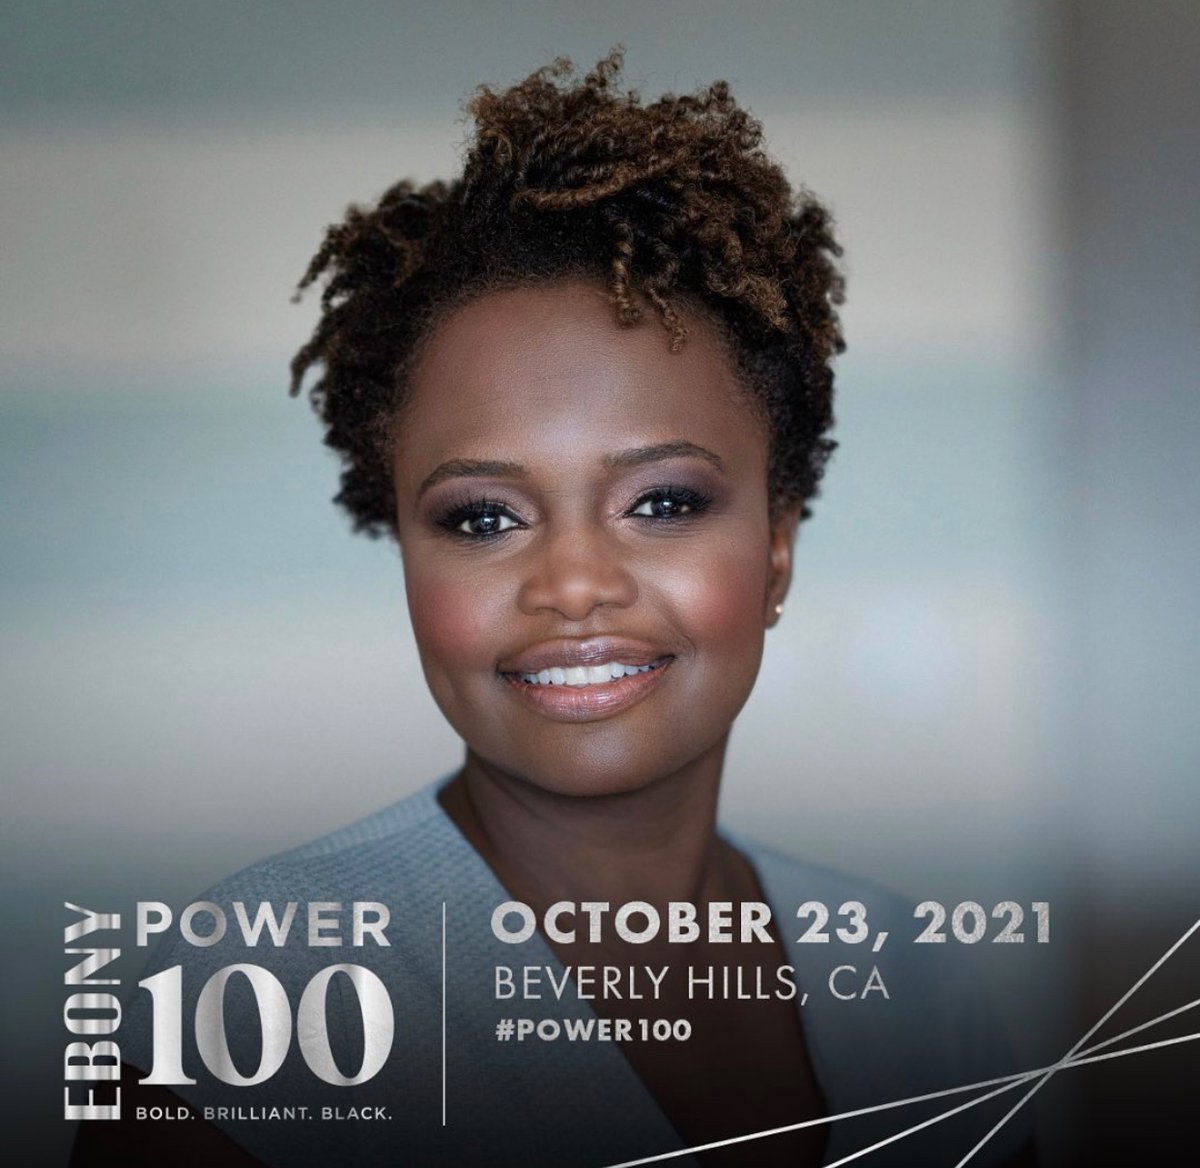 Congrats to Karine Jean-Pierre who has been recognized as a 2021 #EbonyPower100 Ceiling Breaker!

#Fresh #wtpEARTH